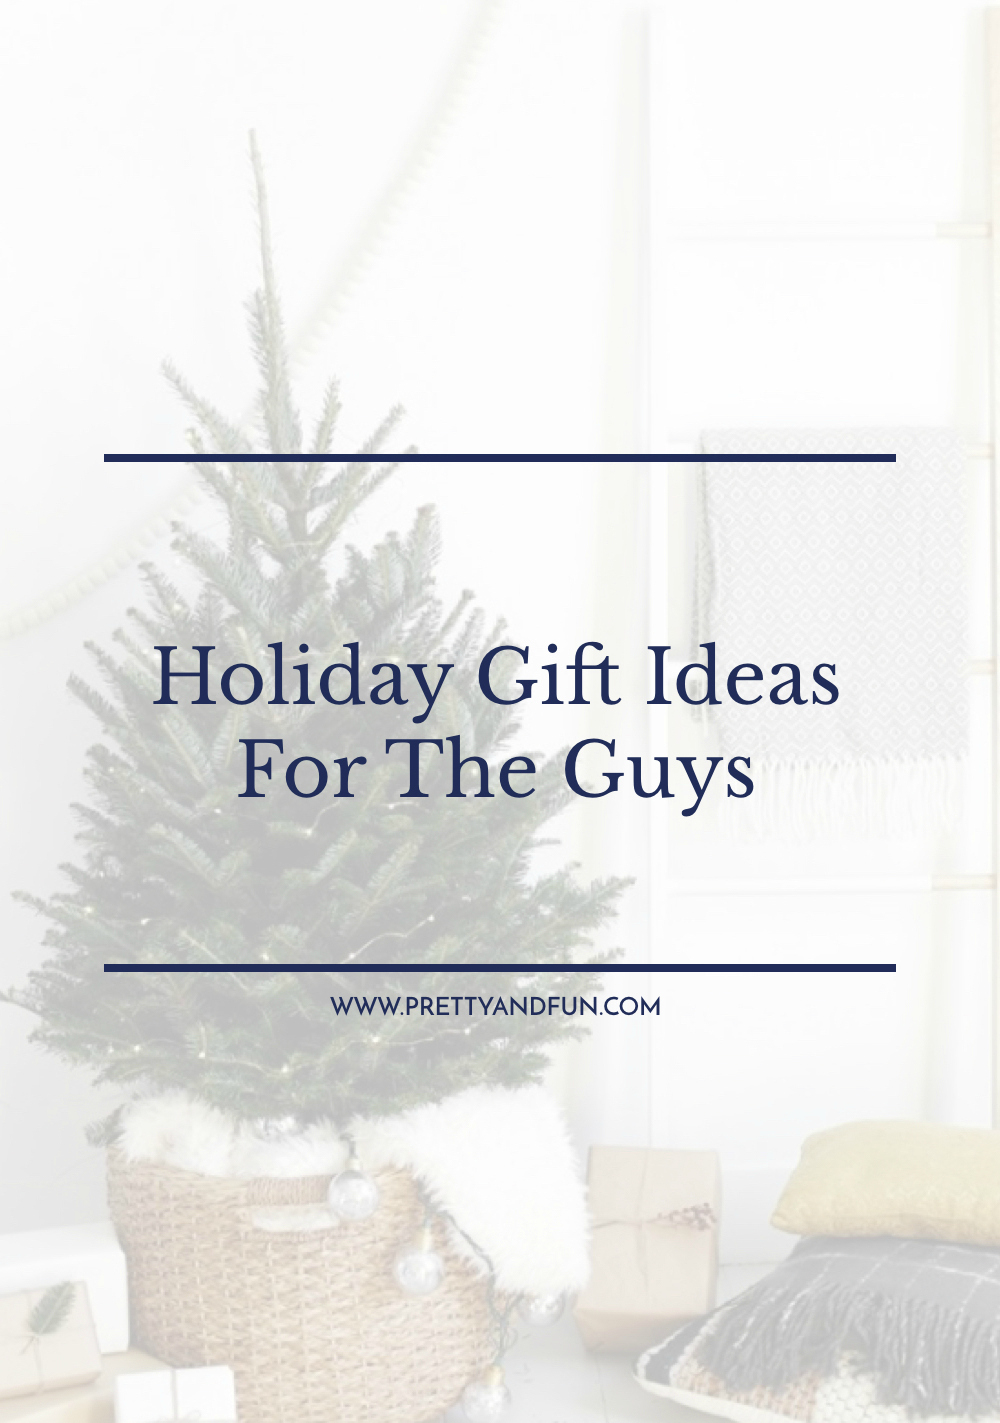 Holiday Gift Ideas for The Guys.